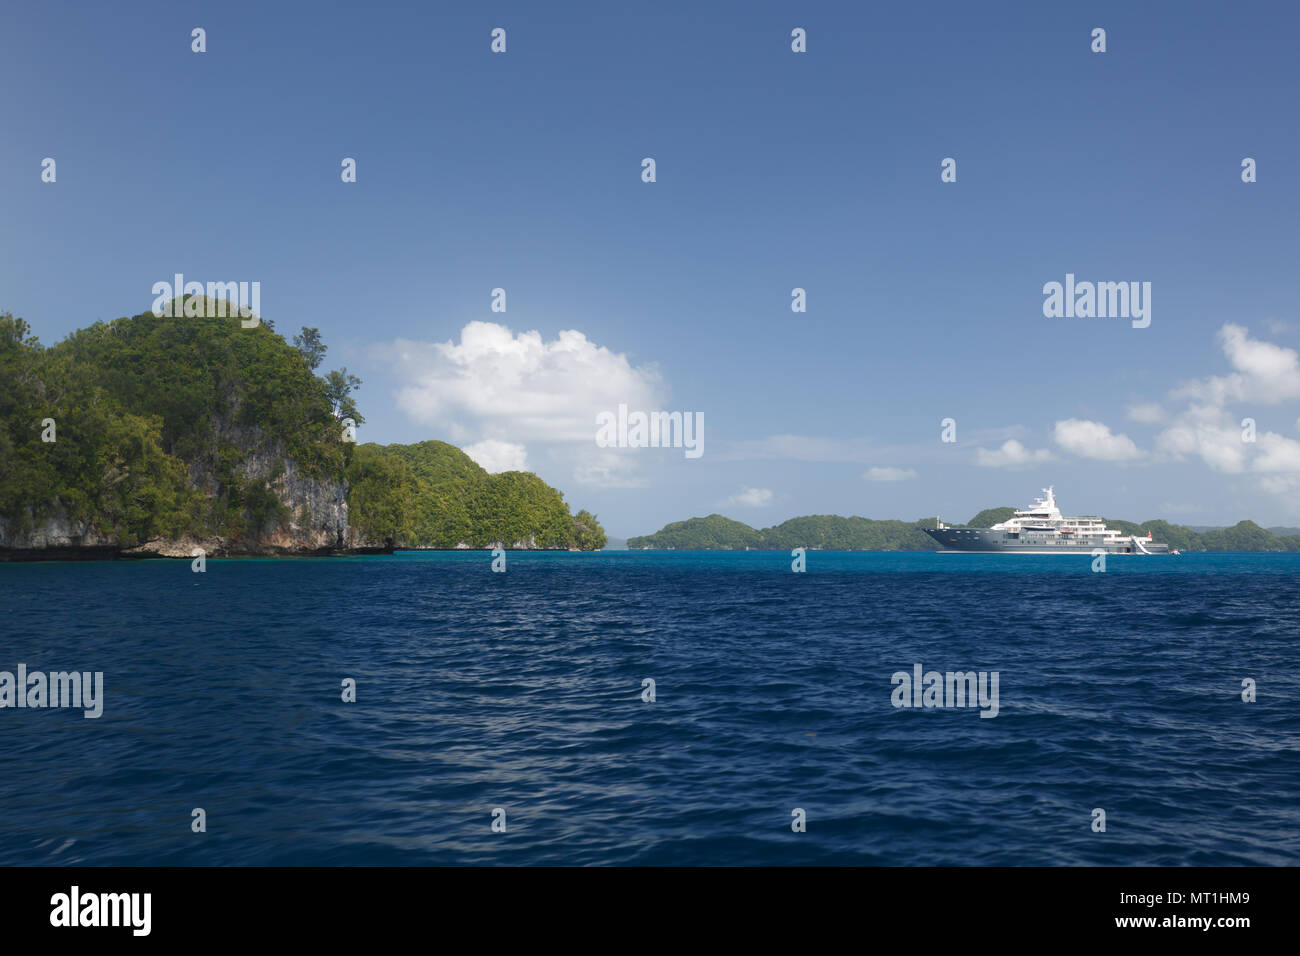 White mega yacht glides amid tropical islands in pacific Stock Photo